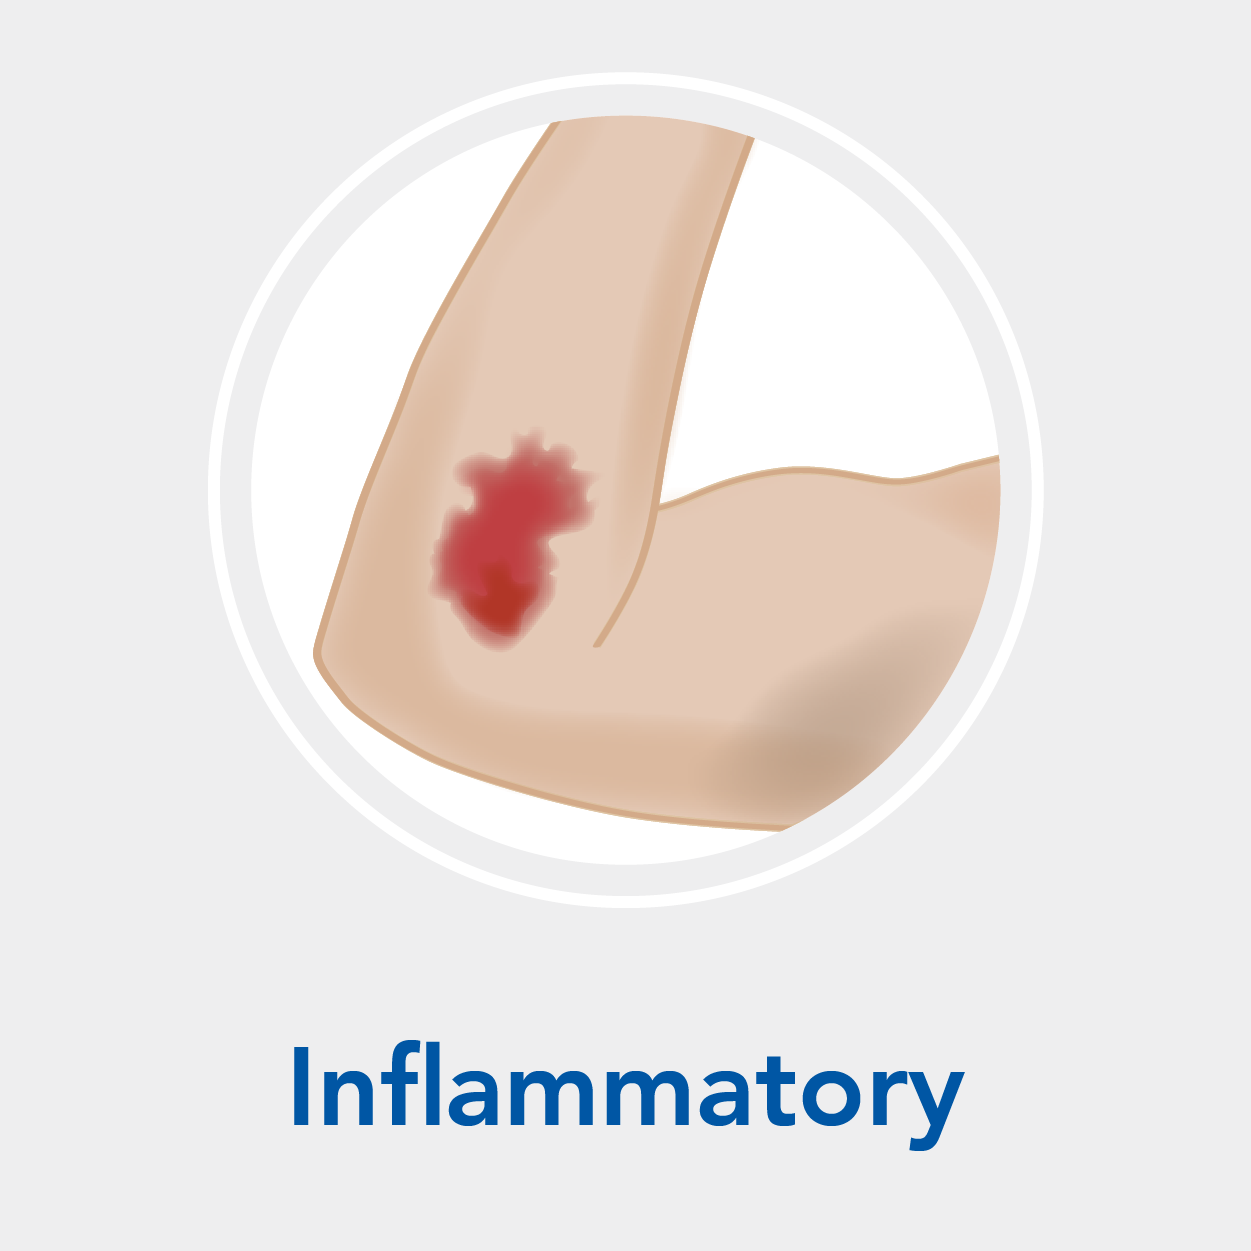 Stage 2: Inflammatory Phase